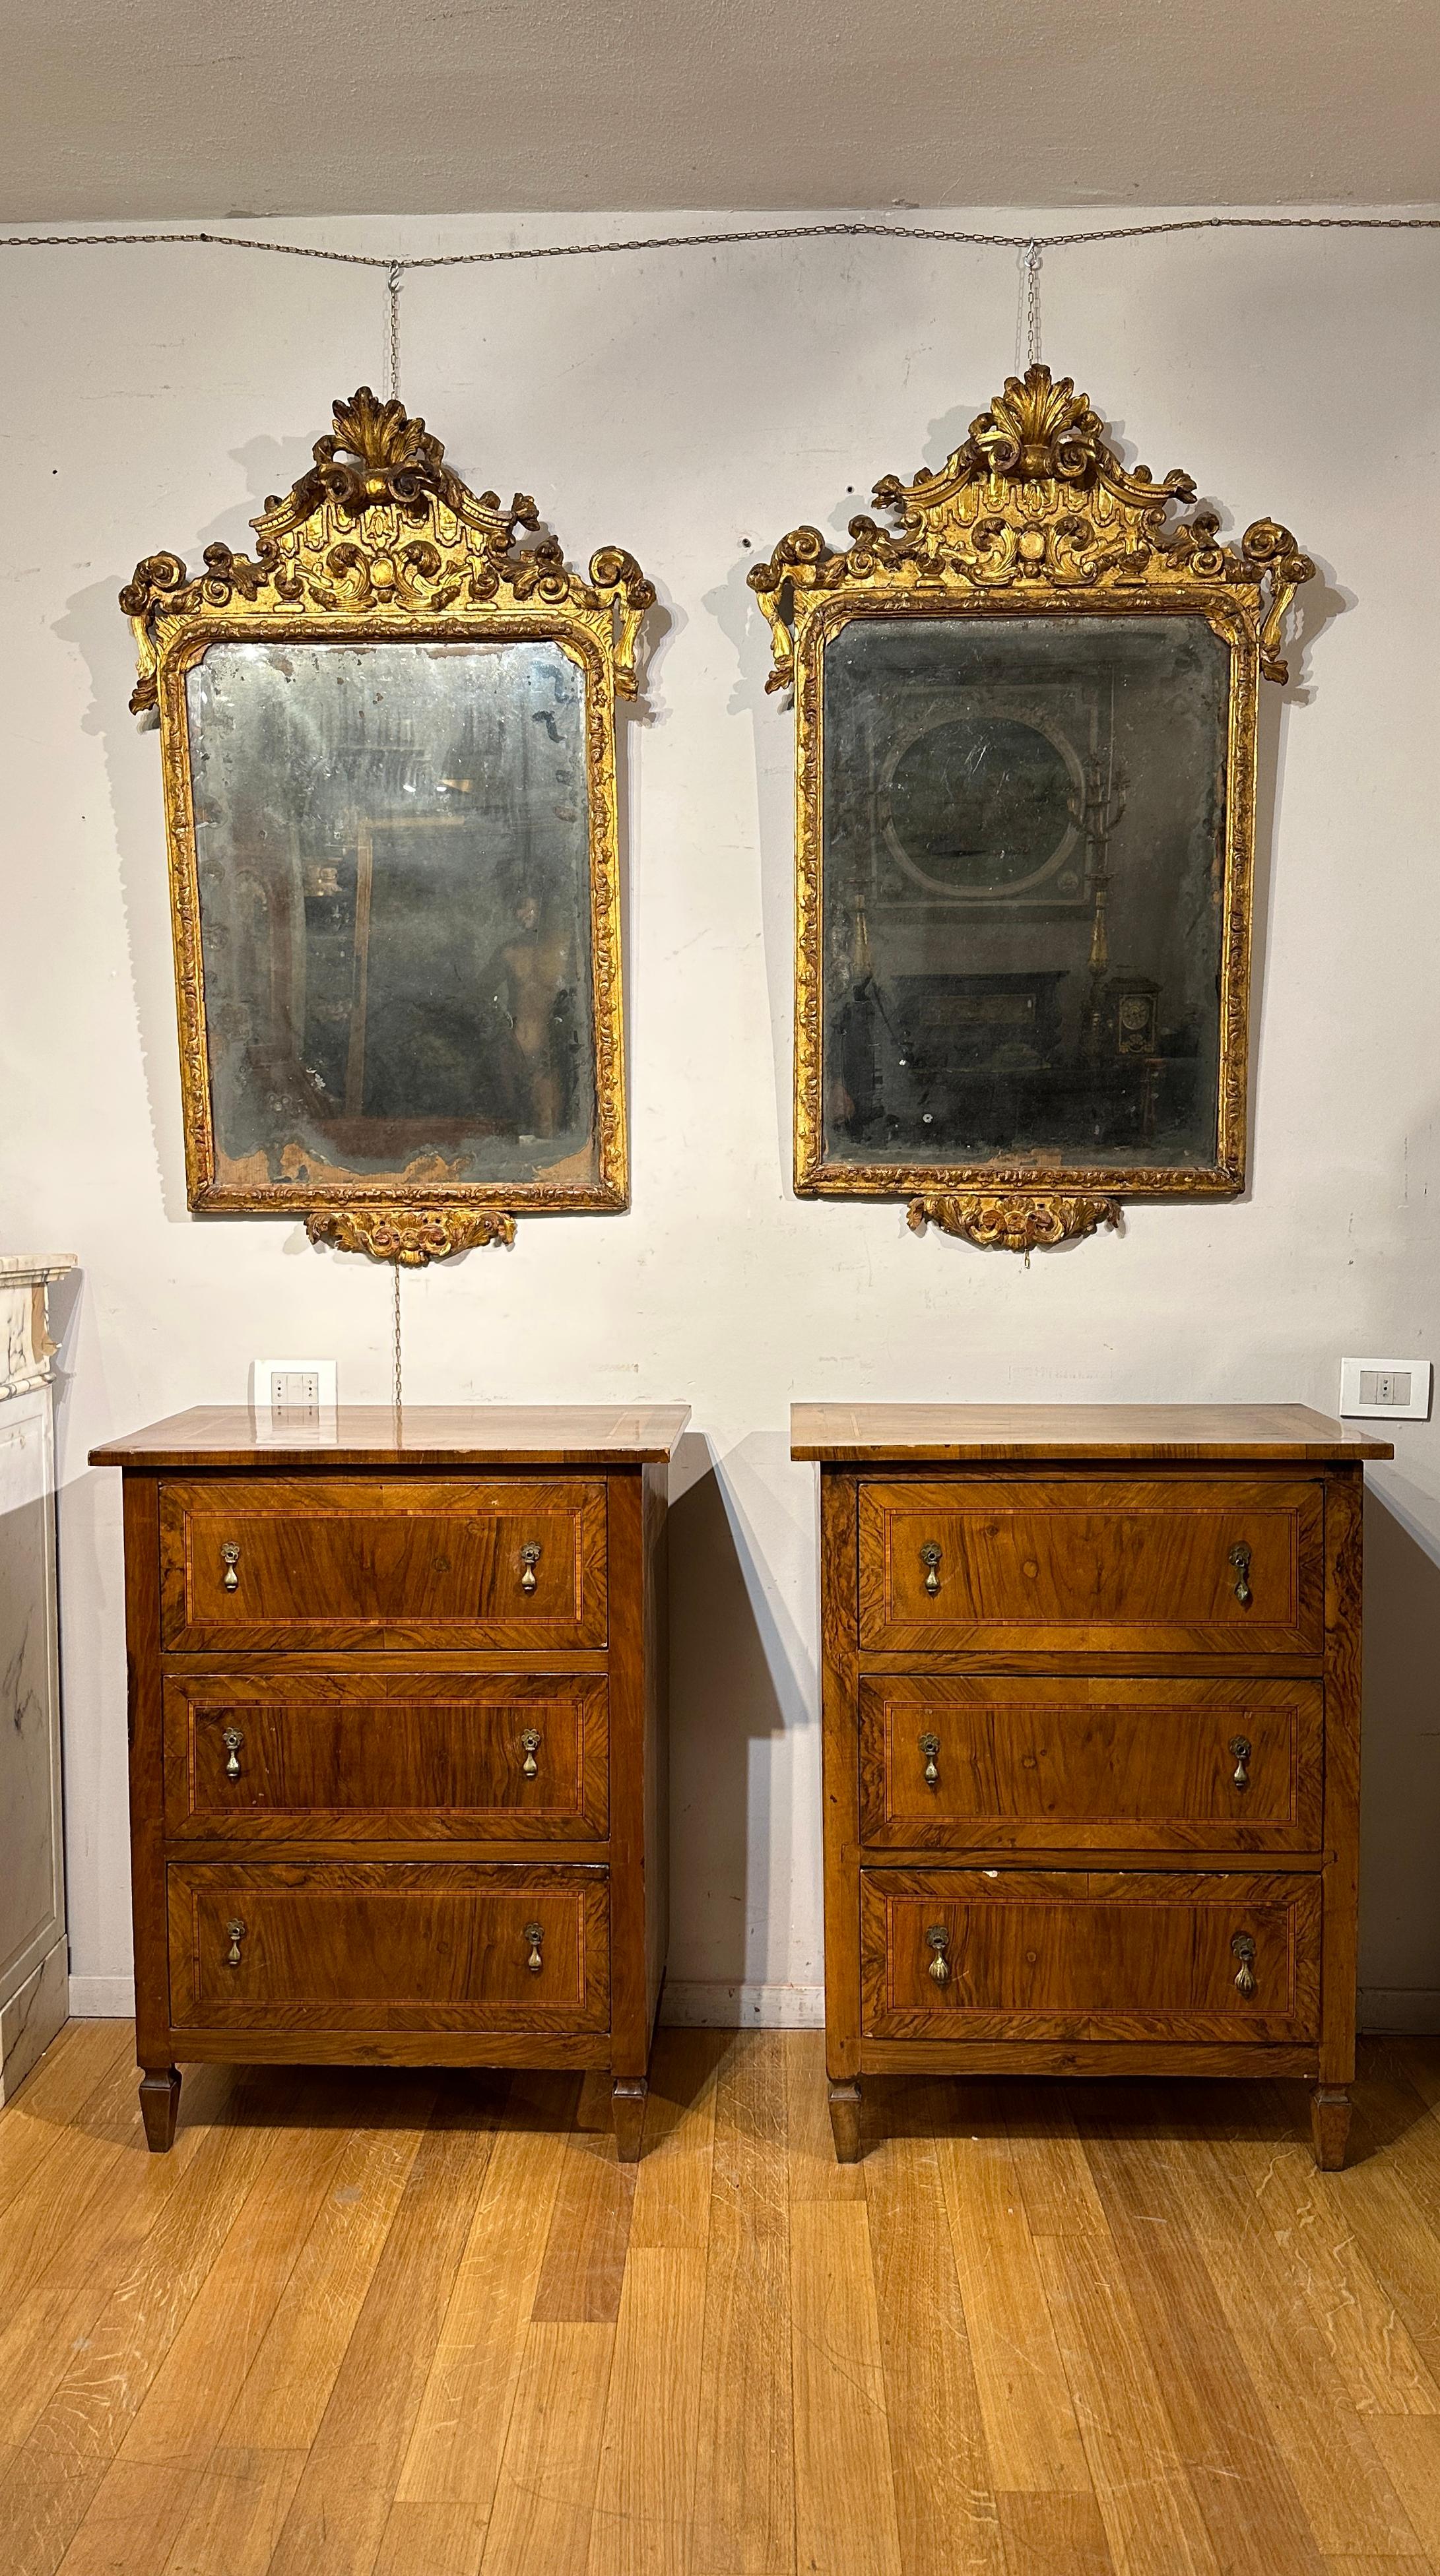 These splendid three-drawer chests of drawers are a fascinating example of late 18th century Venetian manufacturing, during the Neoclassical era. Made with fir wood entirely veneered in walnut, embellished with geometric patterned fruit wood